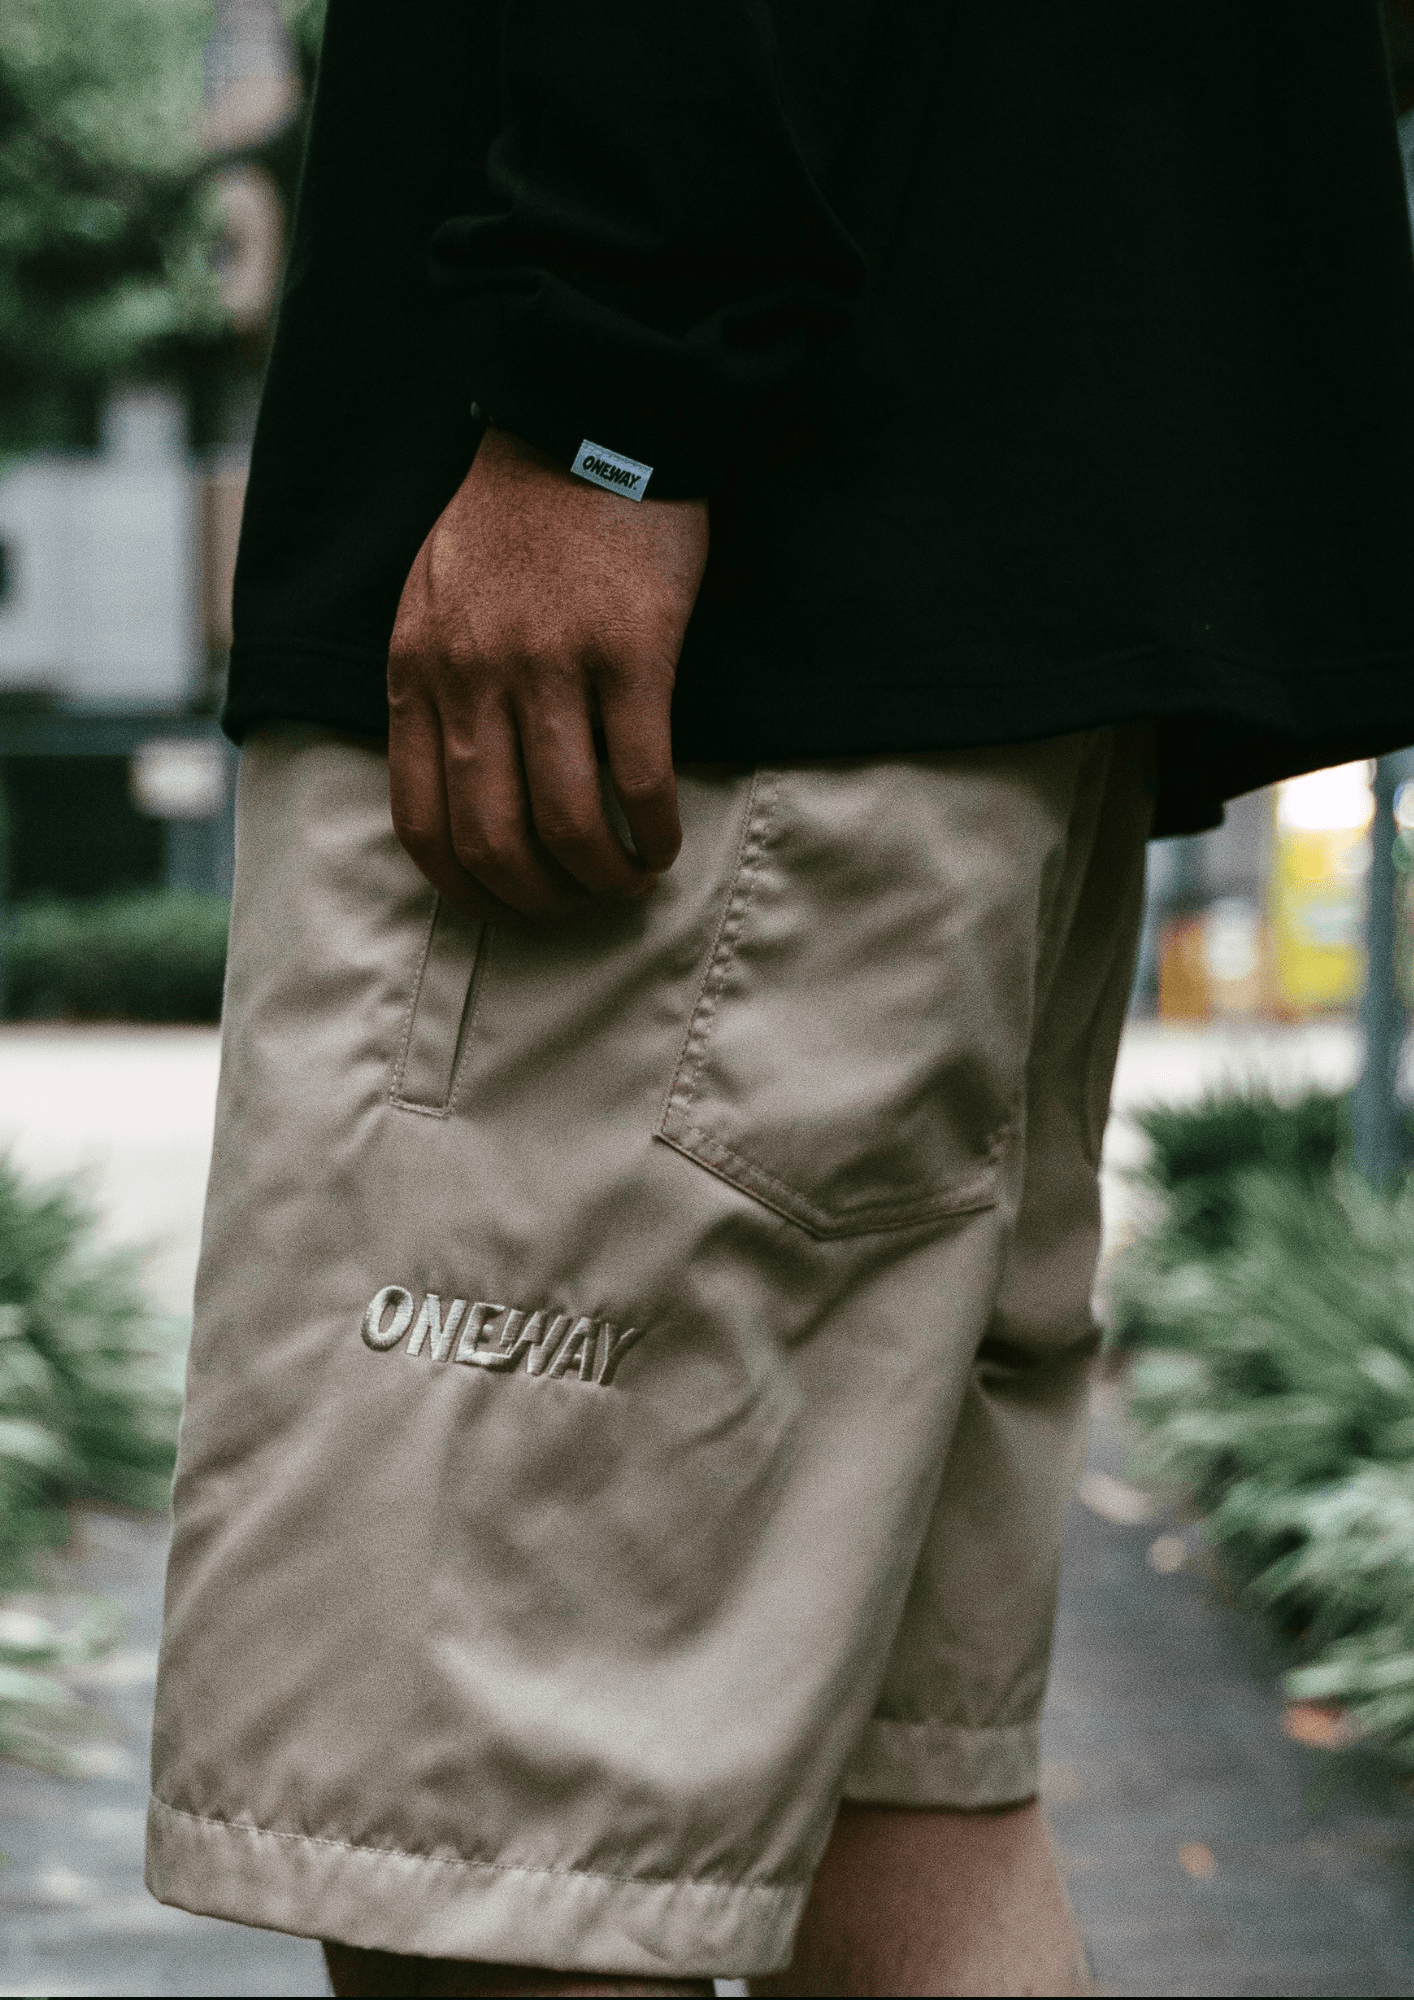 ONEWAY™ 2021 SUMMER COLLECTION